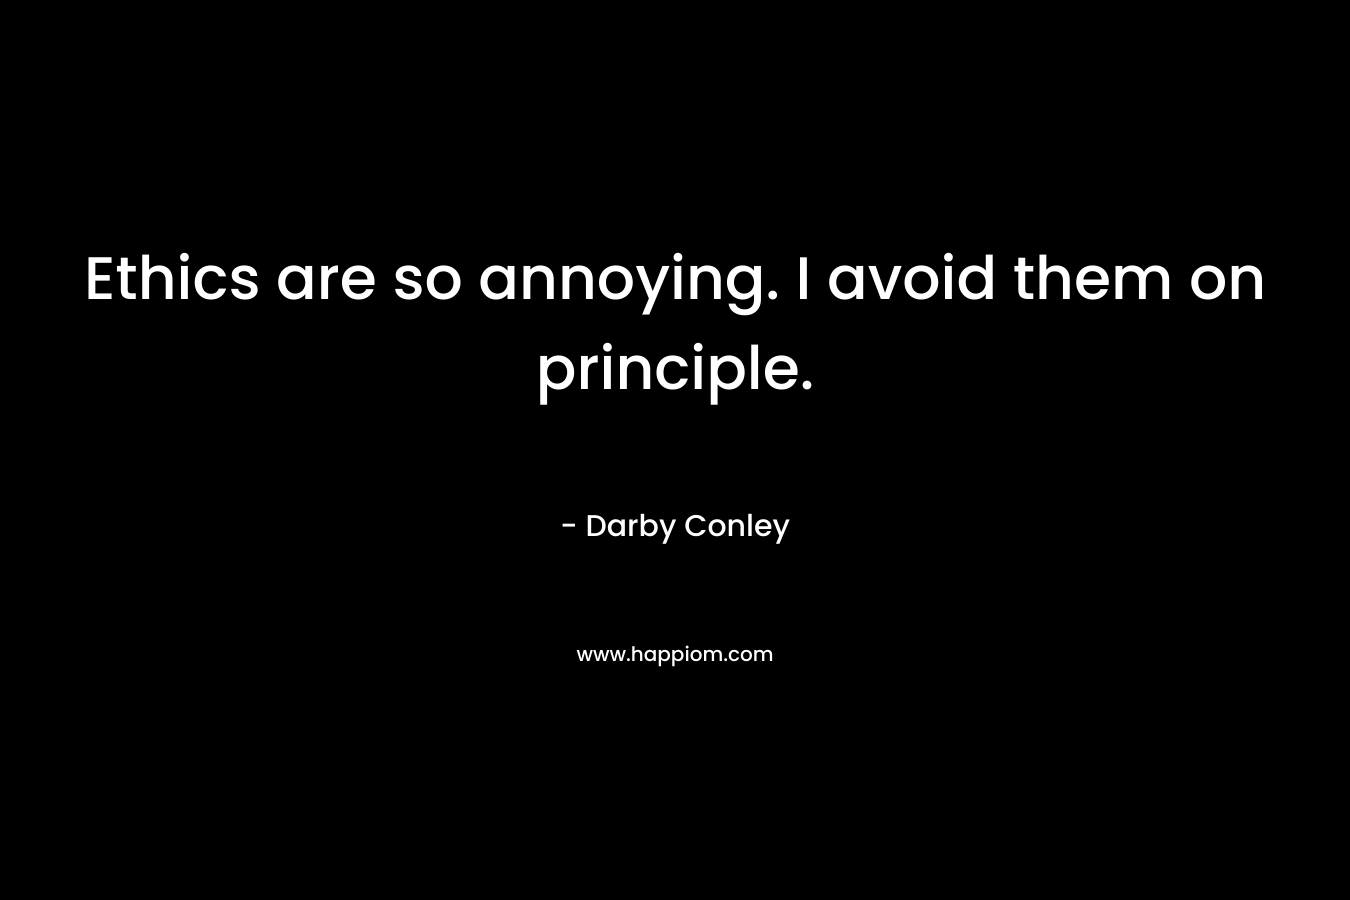 Ethics are so annoying. I avoid them on principle. – Darby Conley